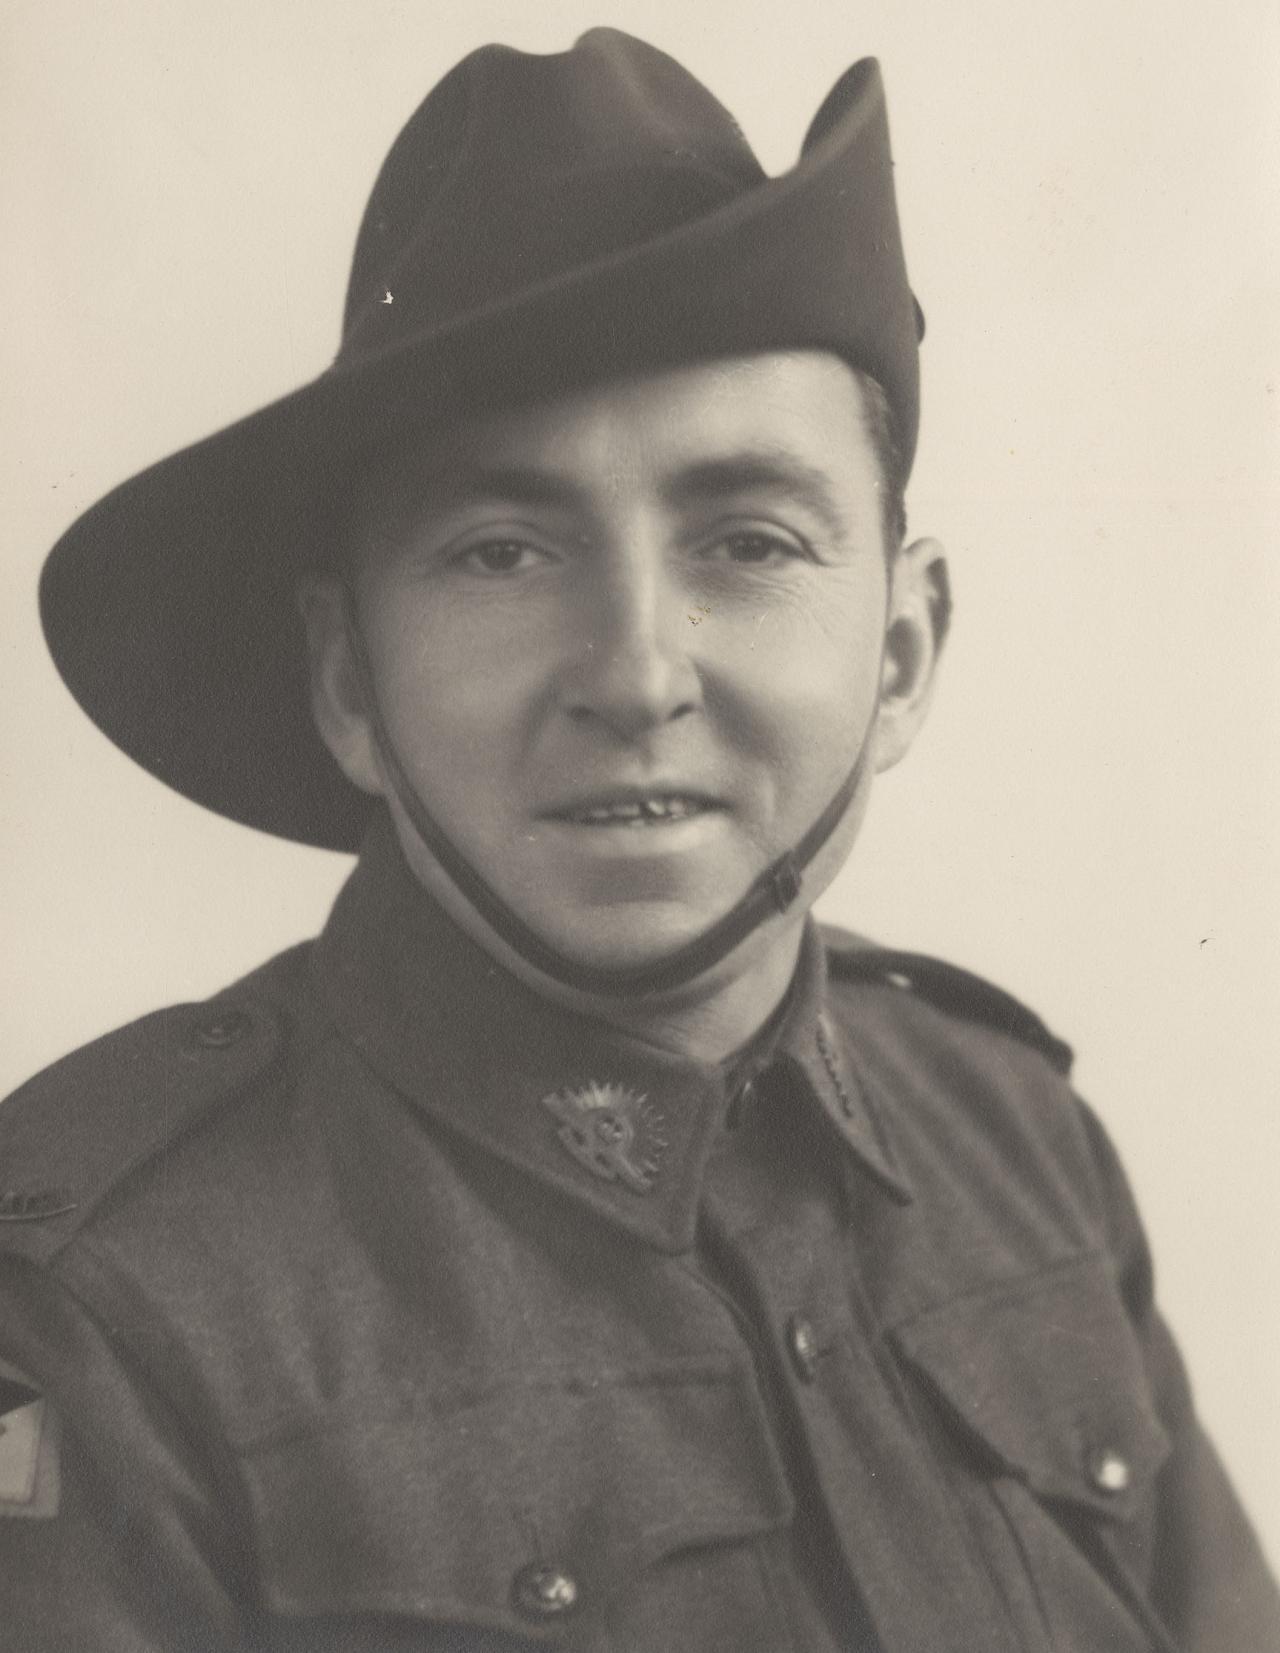 Keith Allan in his Australian Army uniform with slouch hat [clrcri22543752.jpg]